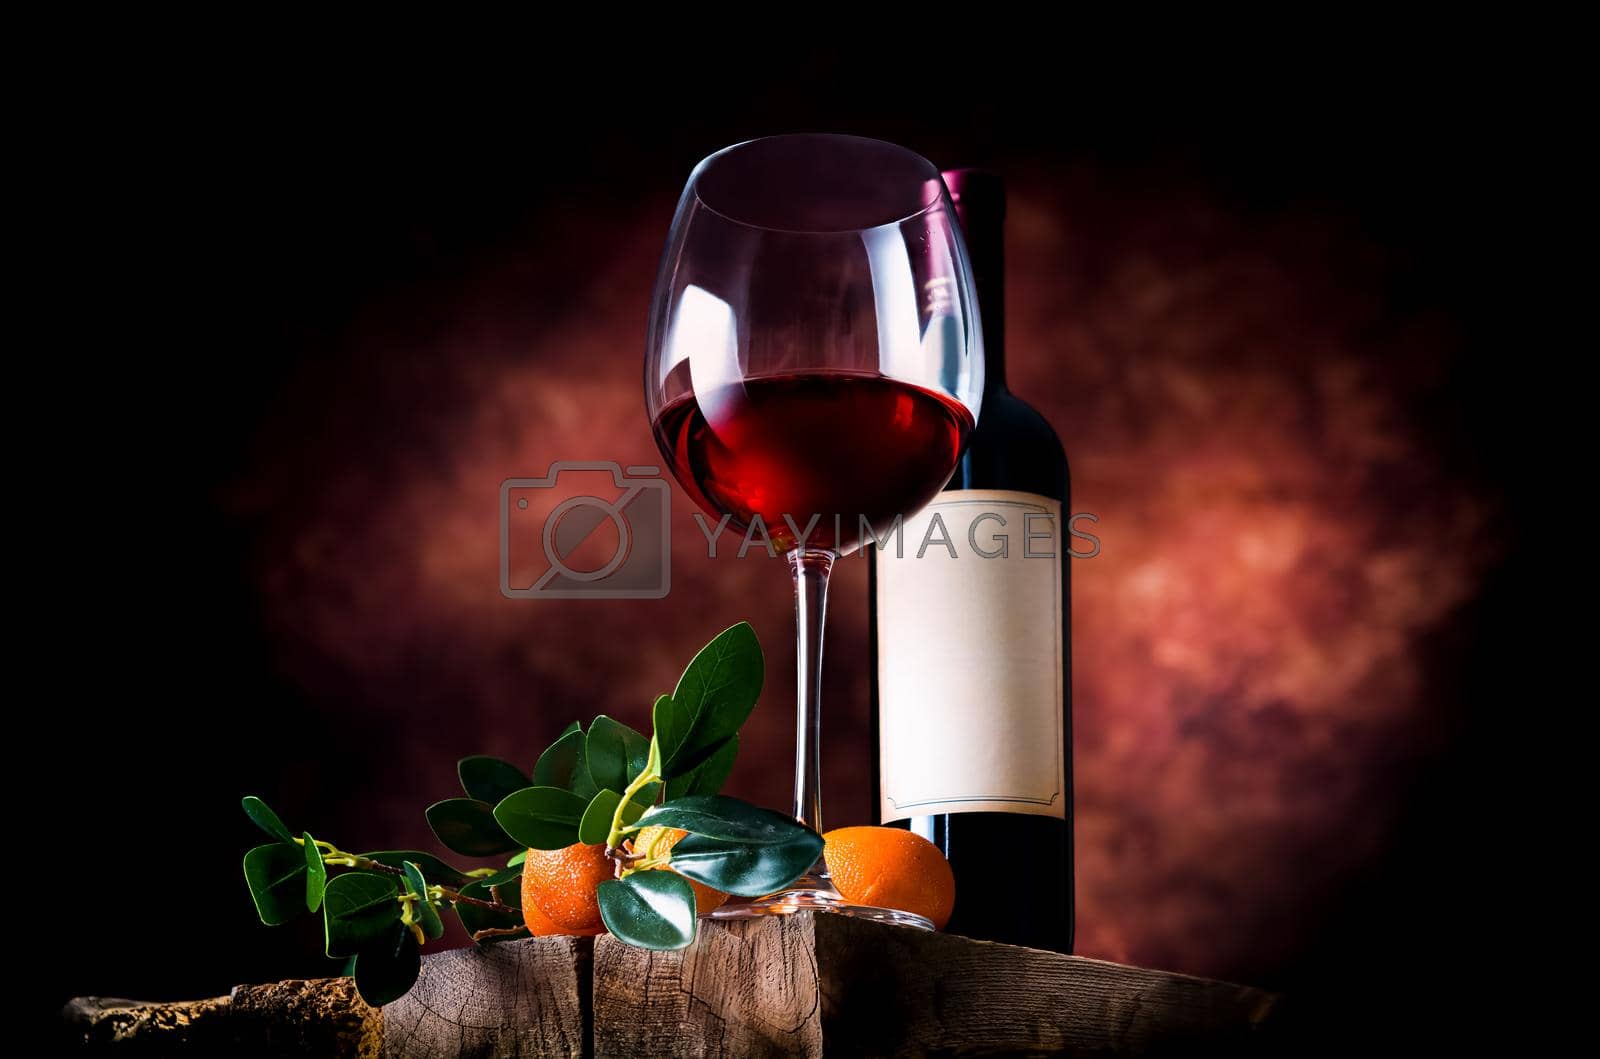 Royalty free image of Tangerine wine in glassware by Givaga